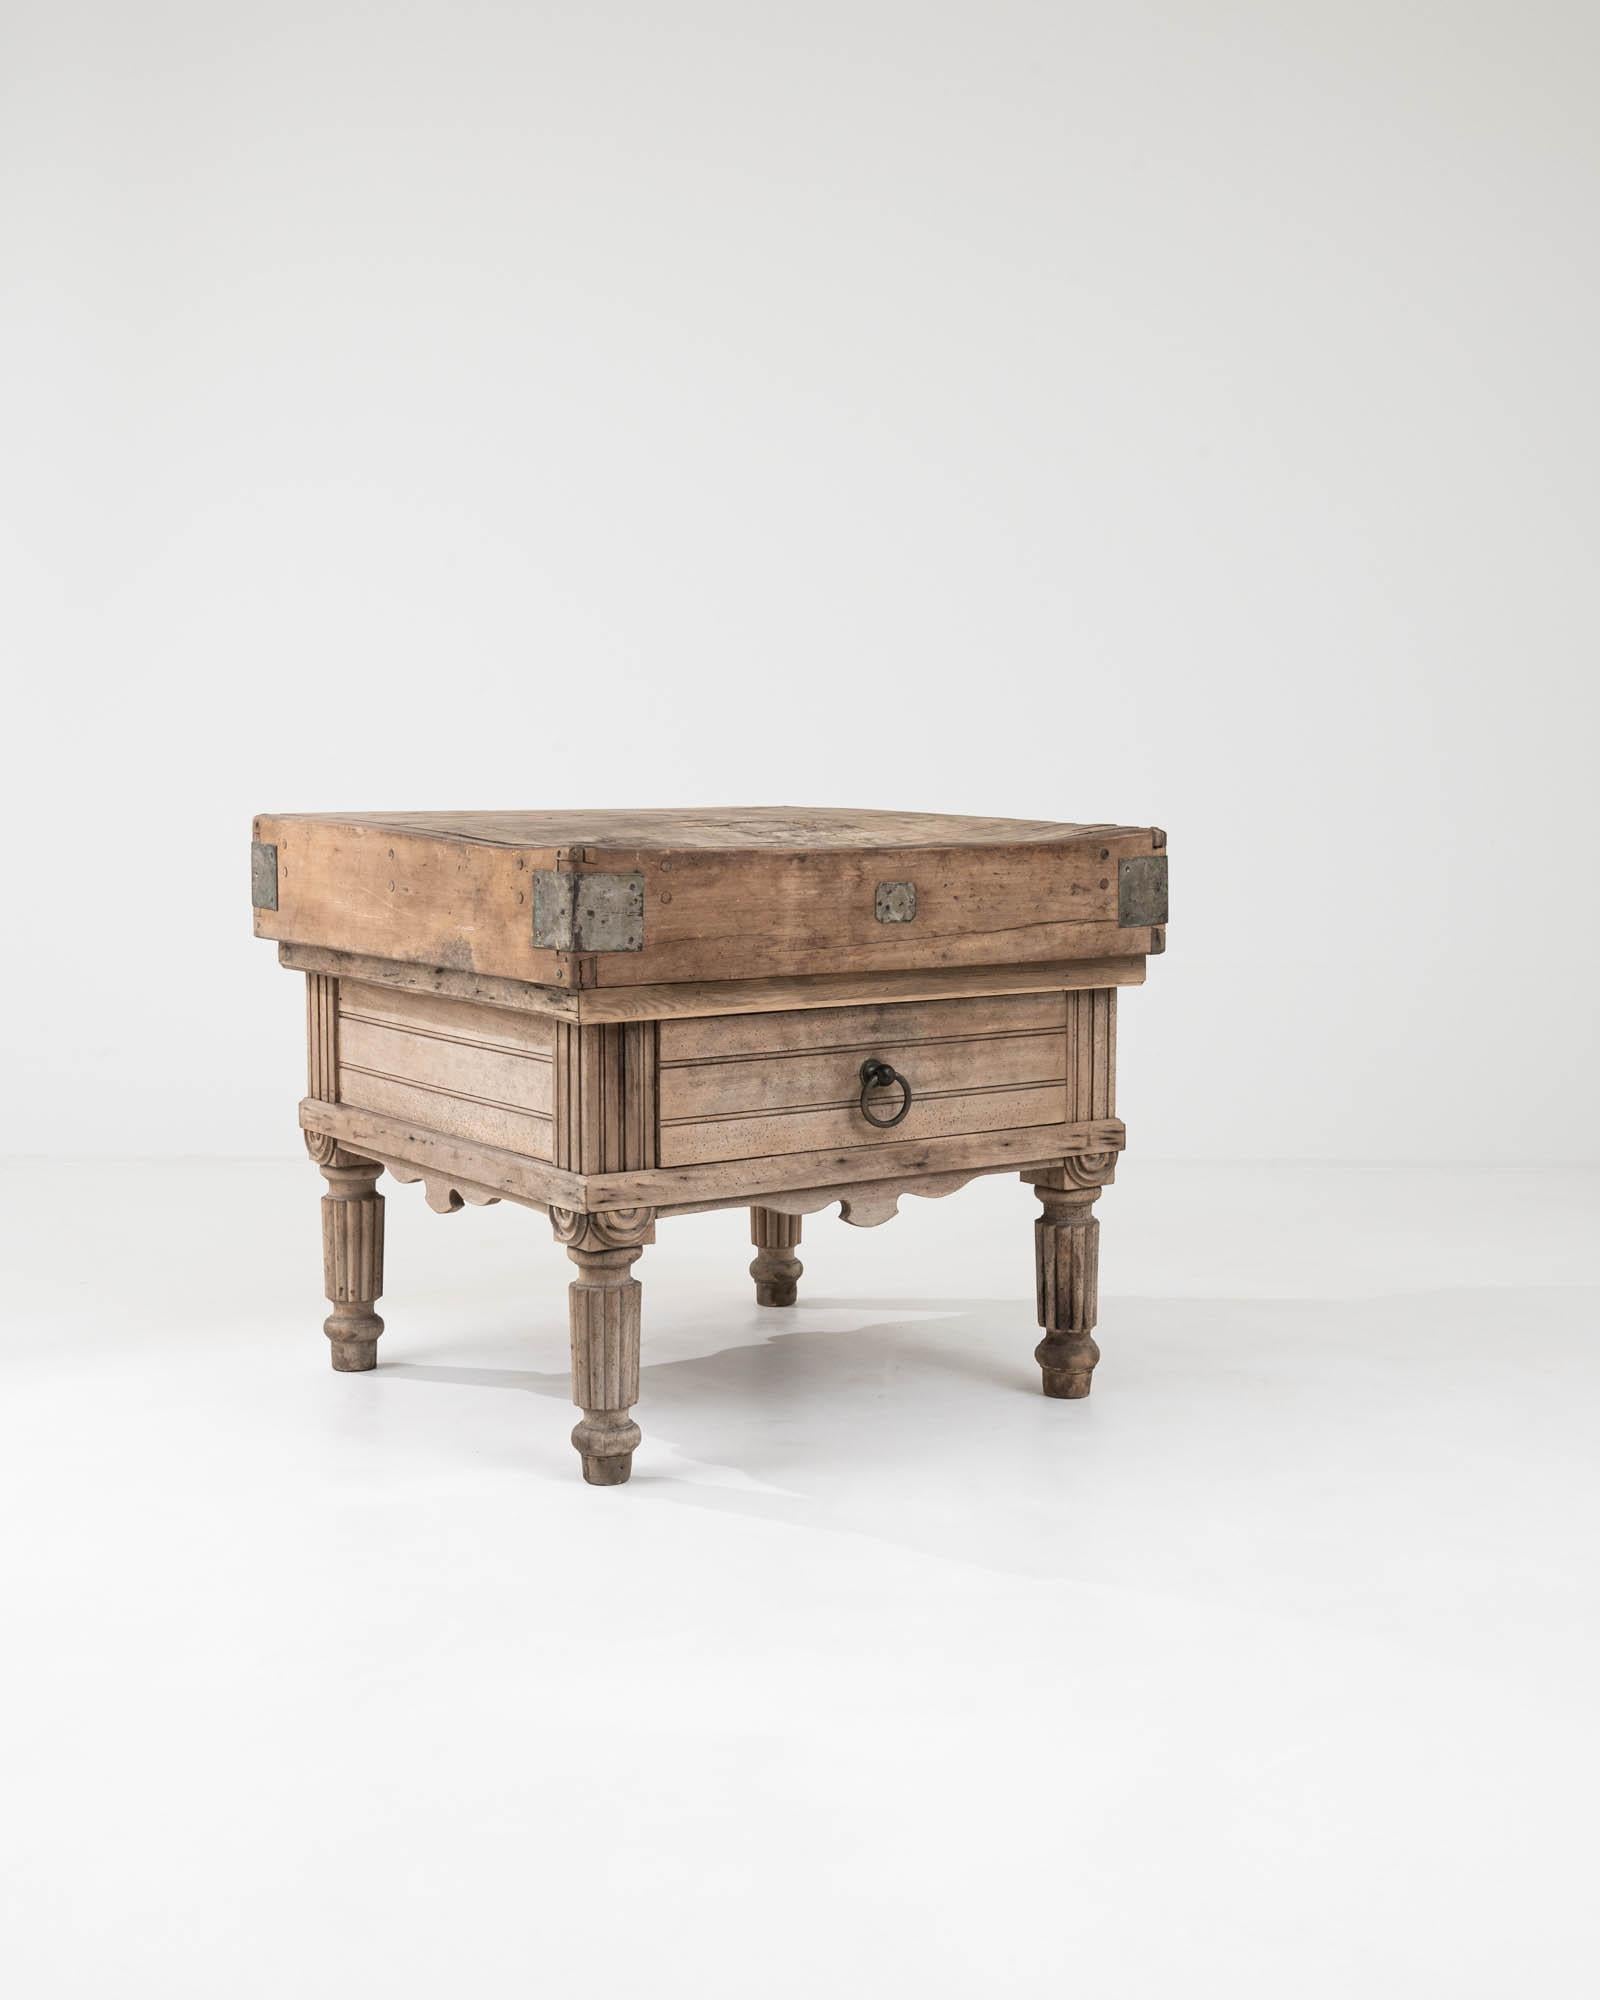 A captivating fusion of functionality and elegance, this work table hails from early 20th-century Belgium. The sturdy tabletop is constructed from separate wooden blocks, expertly assembled to provide the additional support traditionally required by